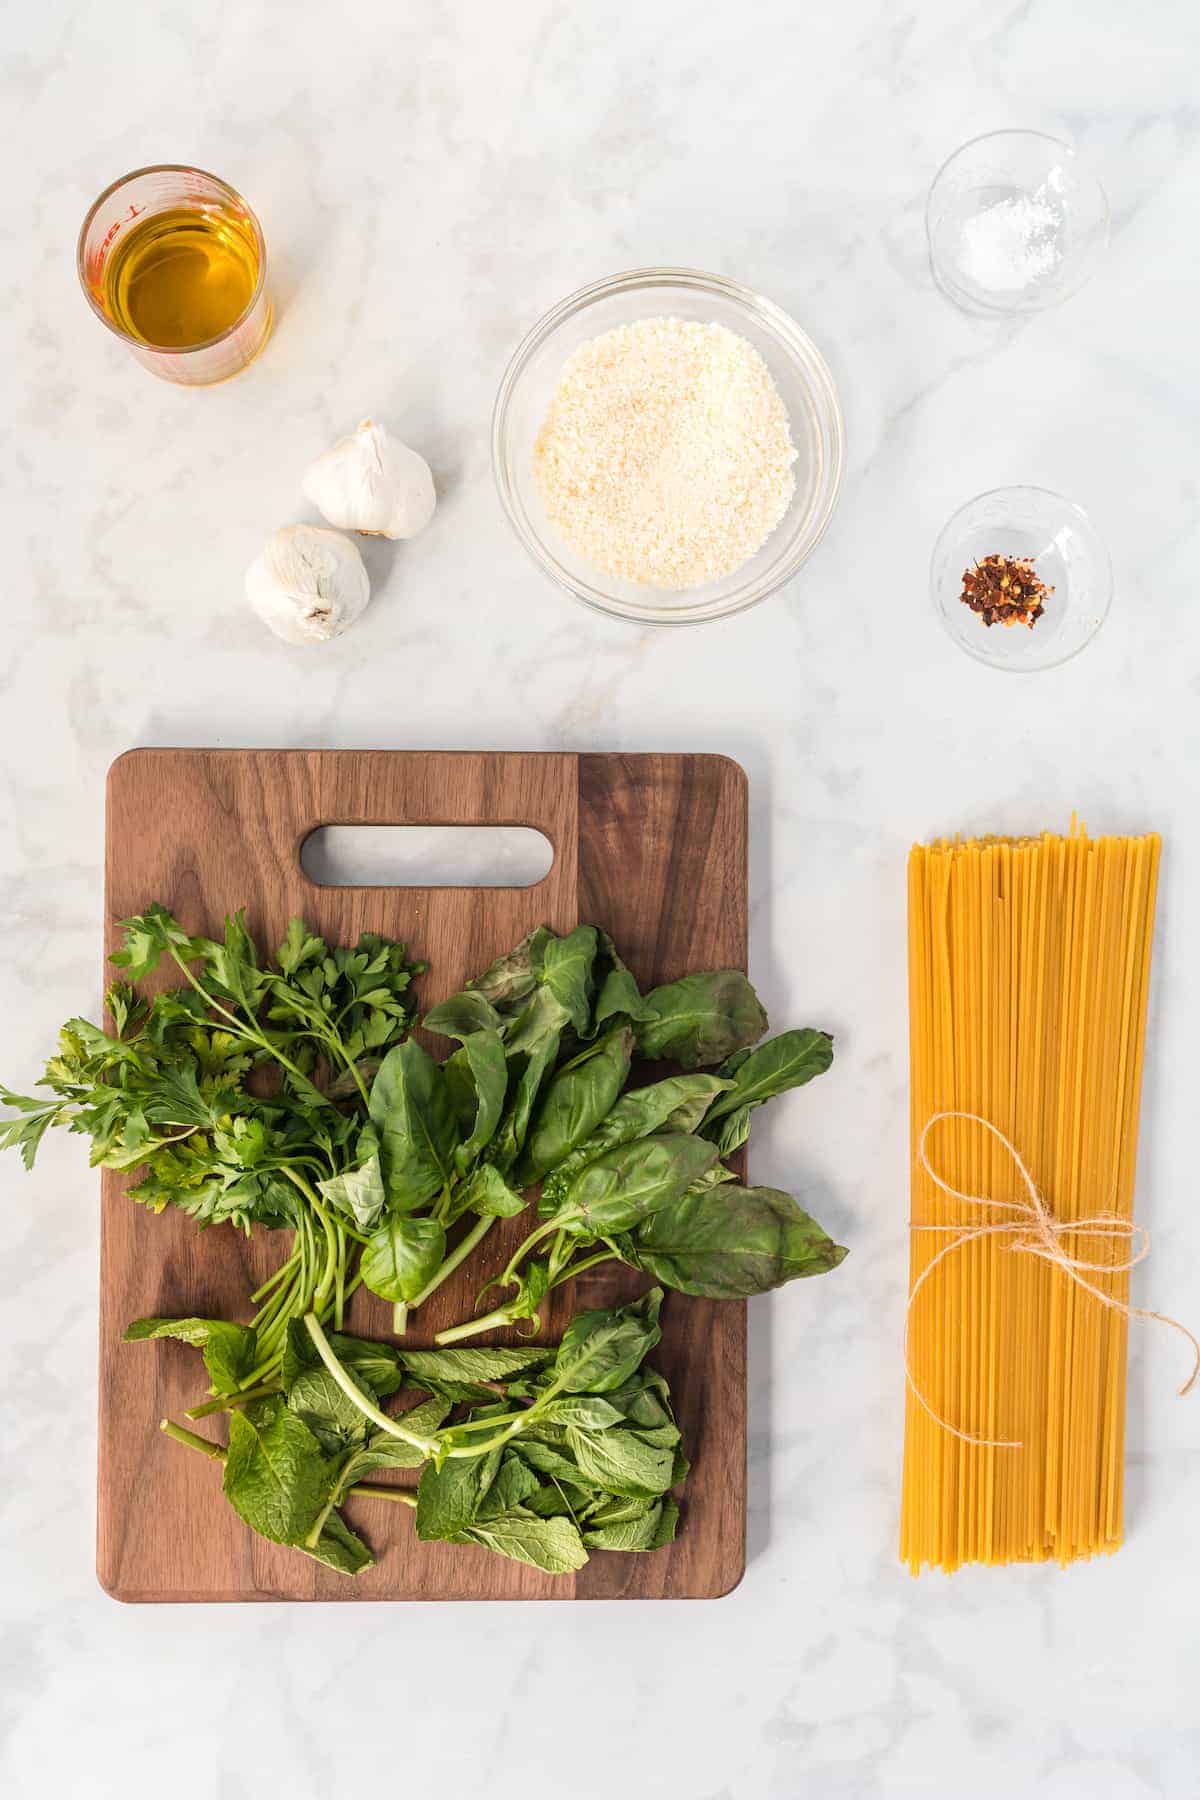 ingredients for the spaghetti in bowls and cutting board